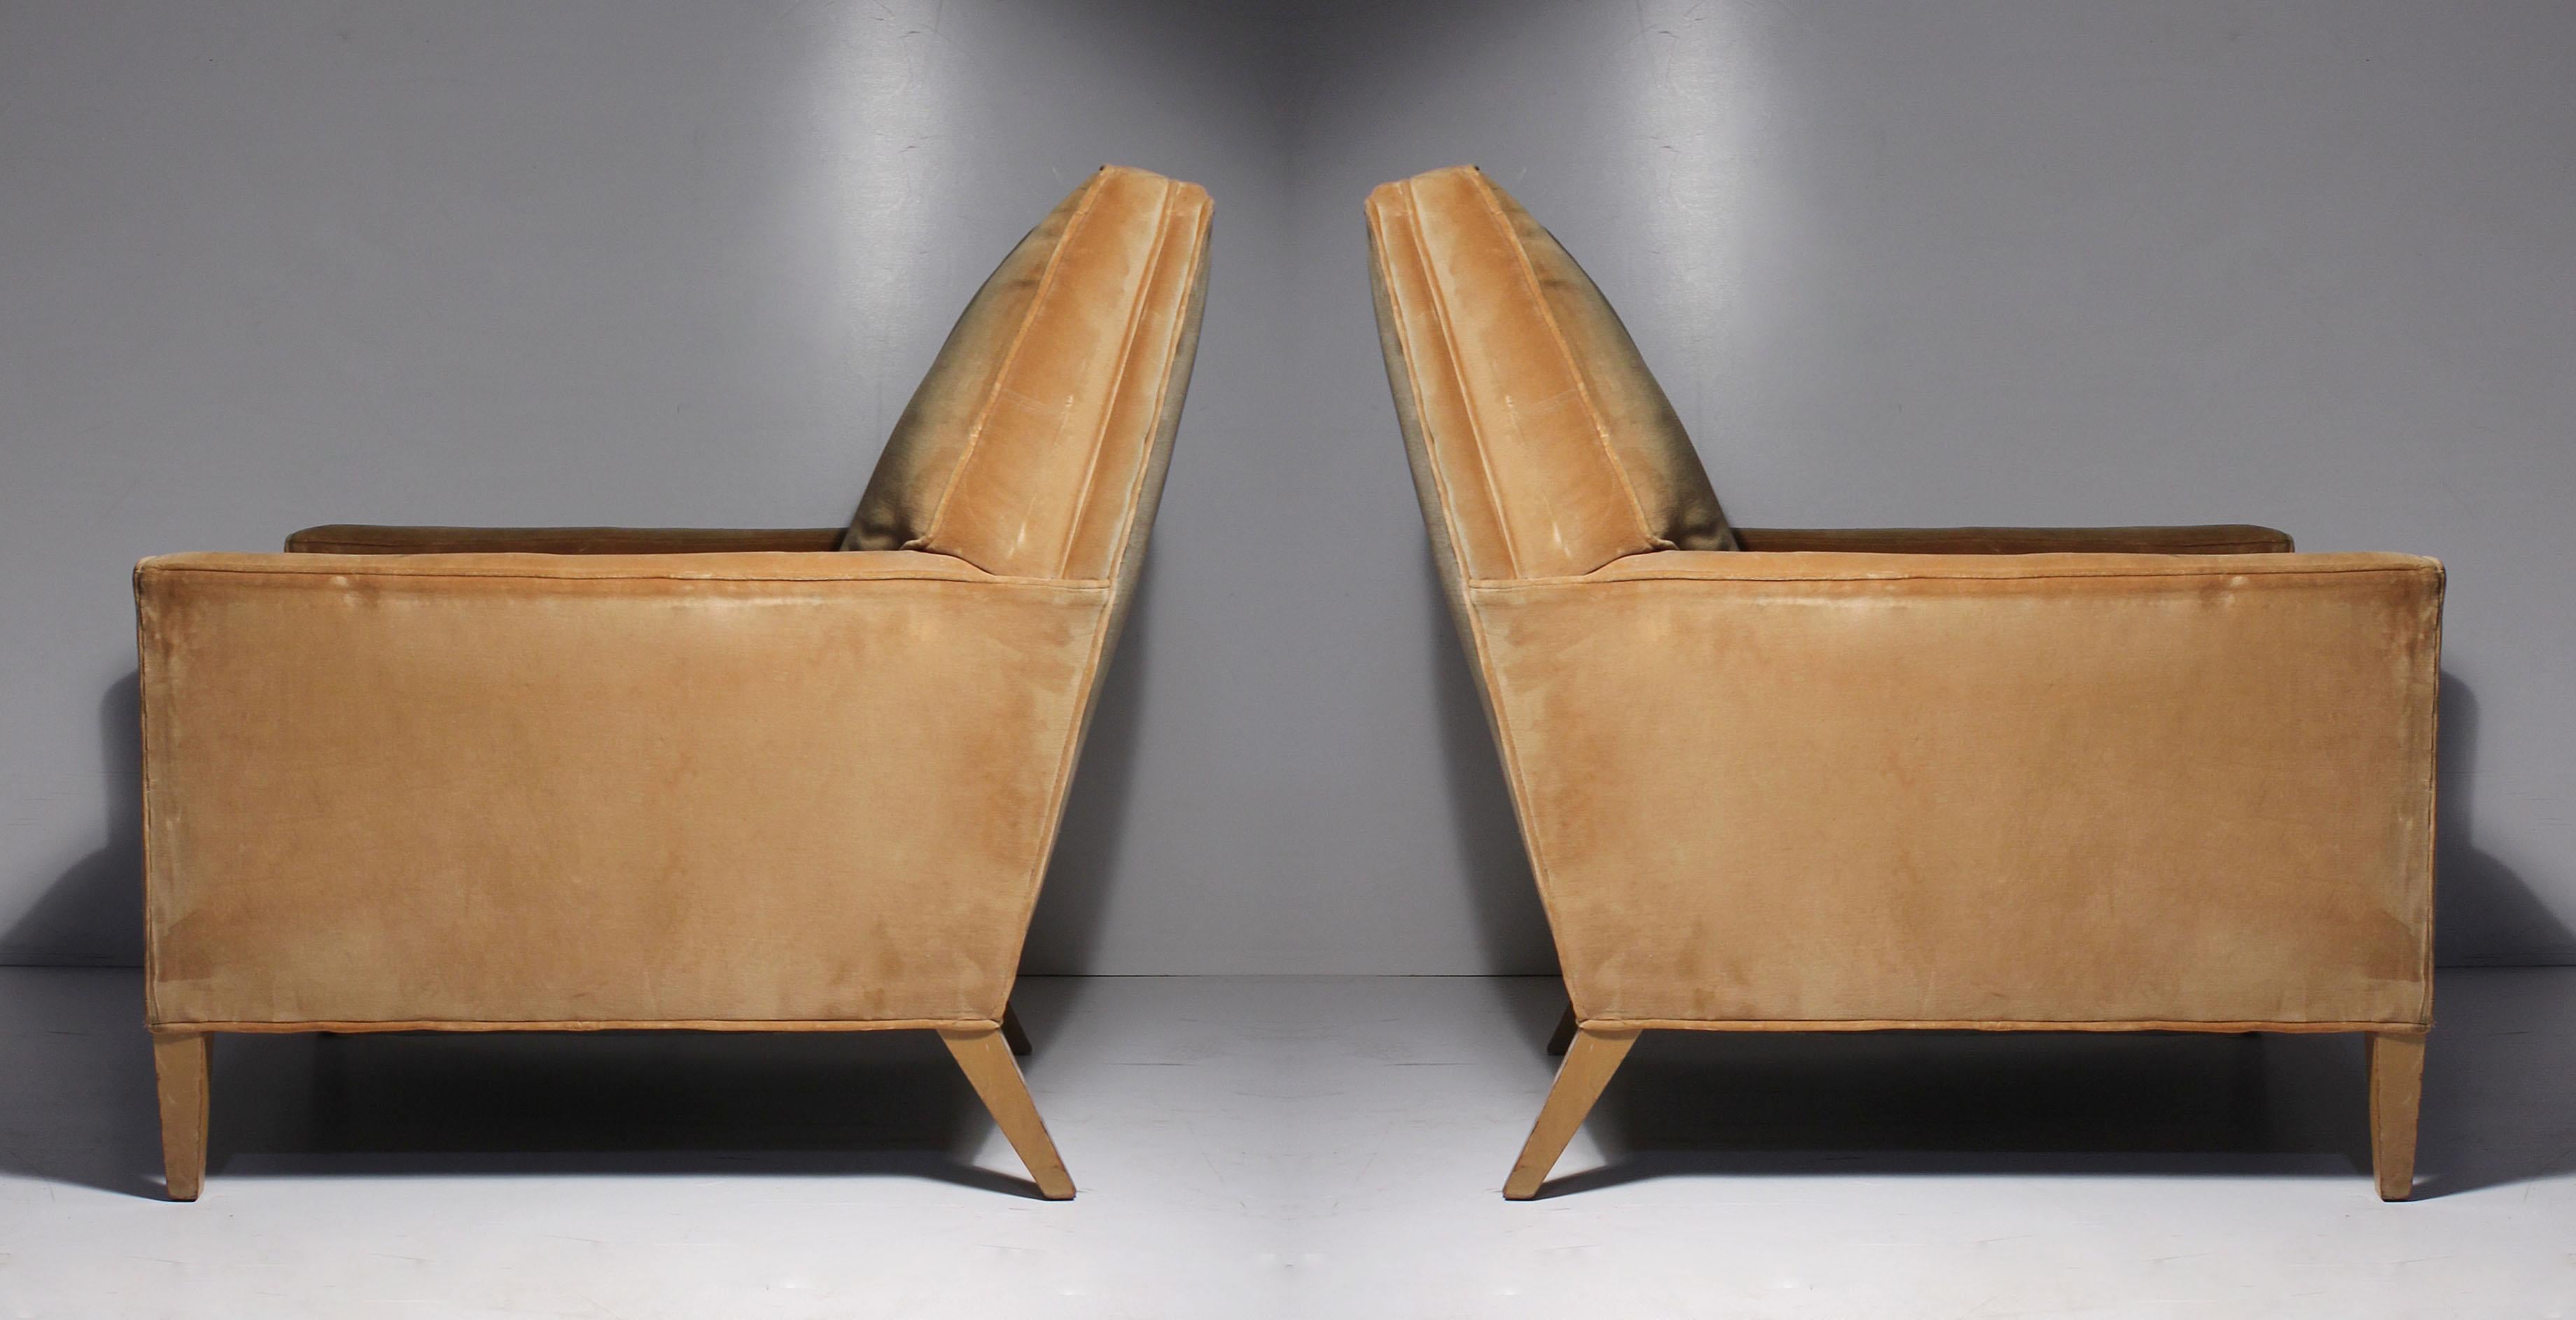 Pair of Vintage Robsjohn Gibbings lounge chair for Widdicomb. Beautiful proportions. A more uncommon deep lounge form. Tapered front and back legs. Elegant and Modern.

Recently acquired a 2nd chair that was recently upholstered in White Muslim.